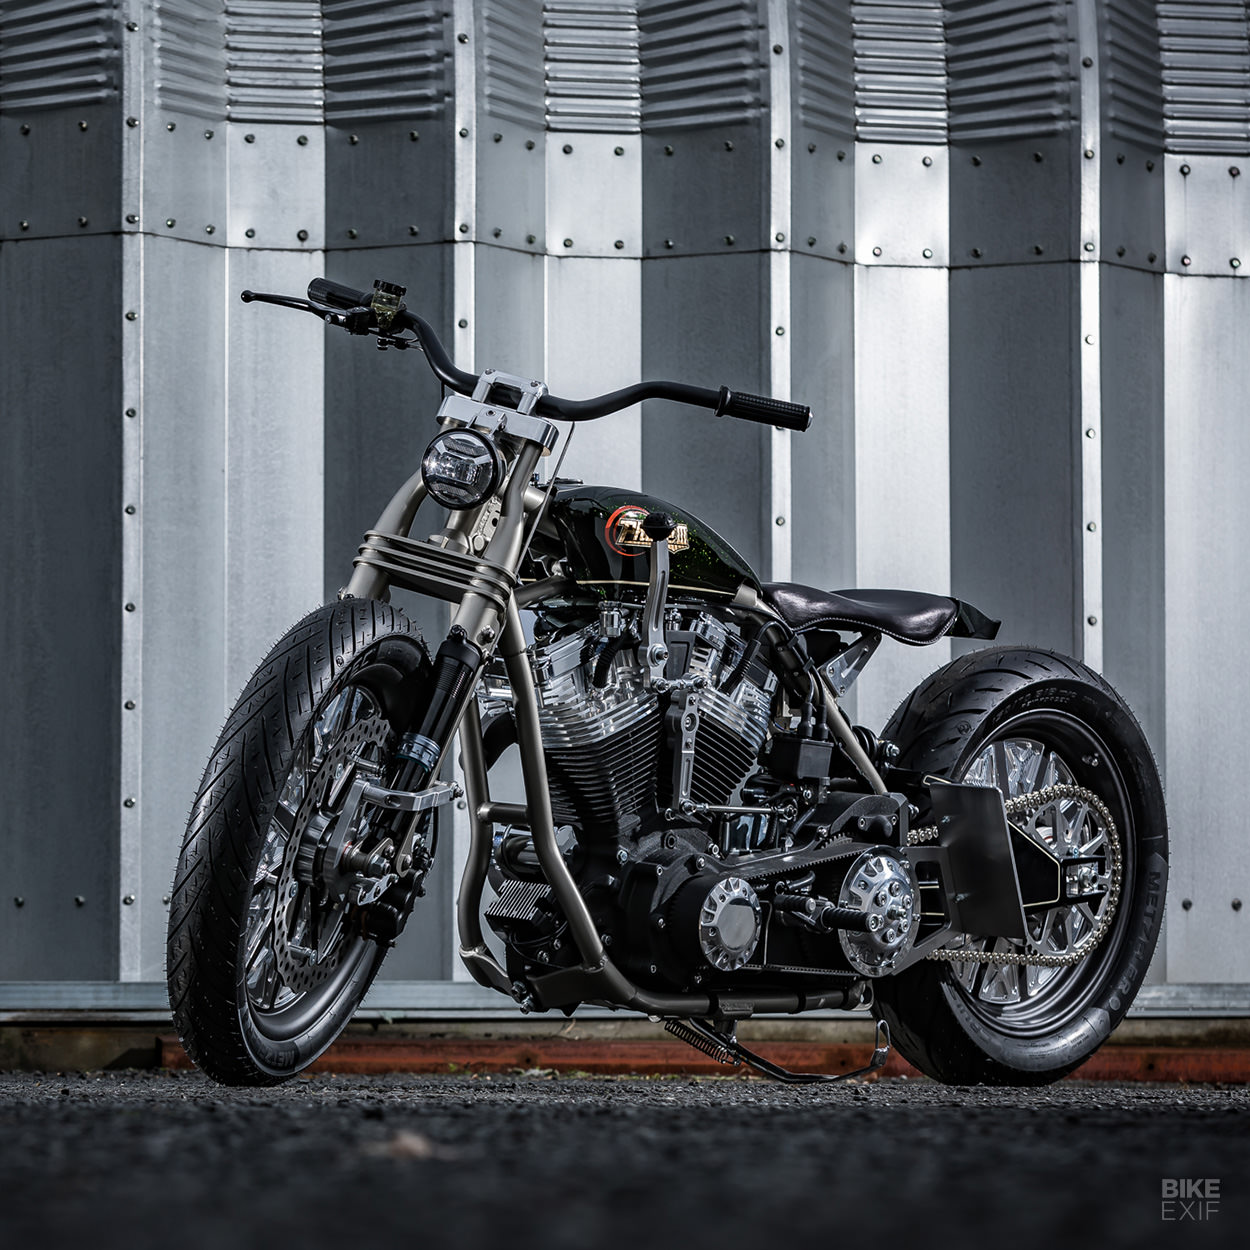 What We Know About the Harley-Davidson High Performance Custom